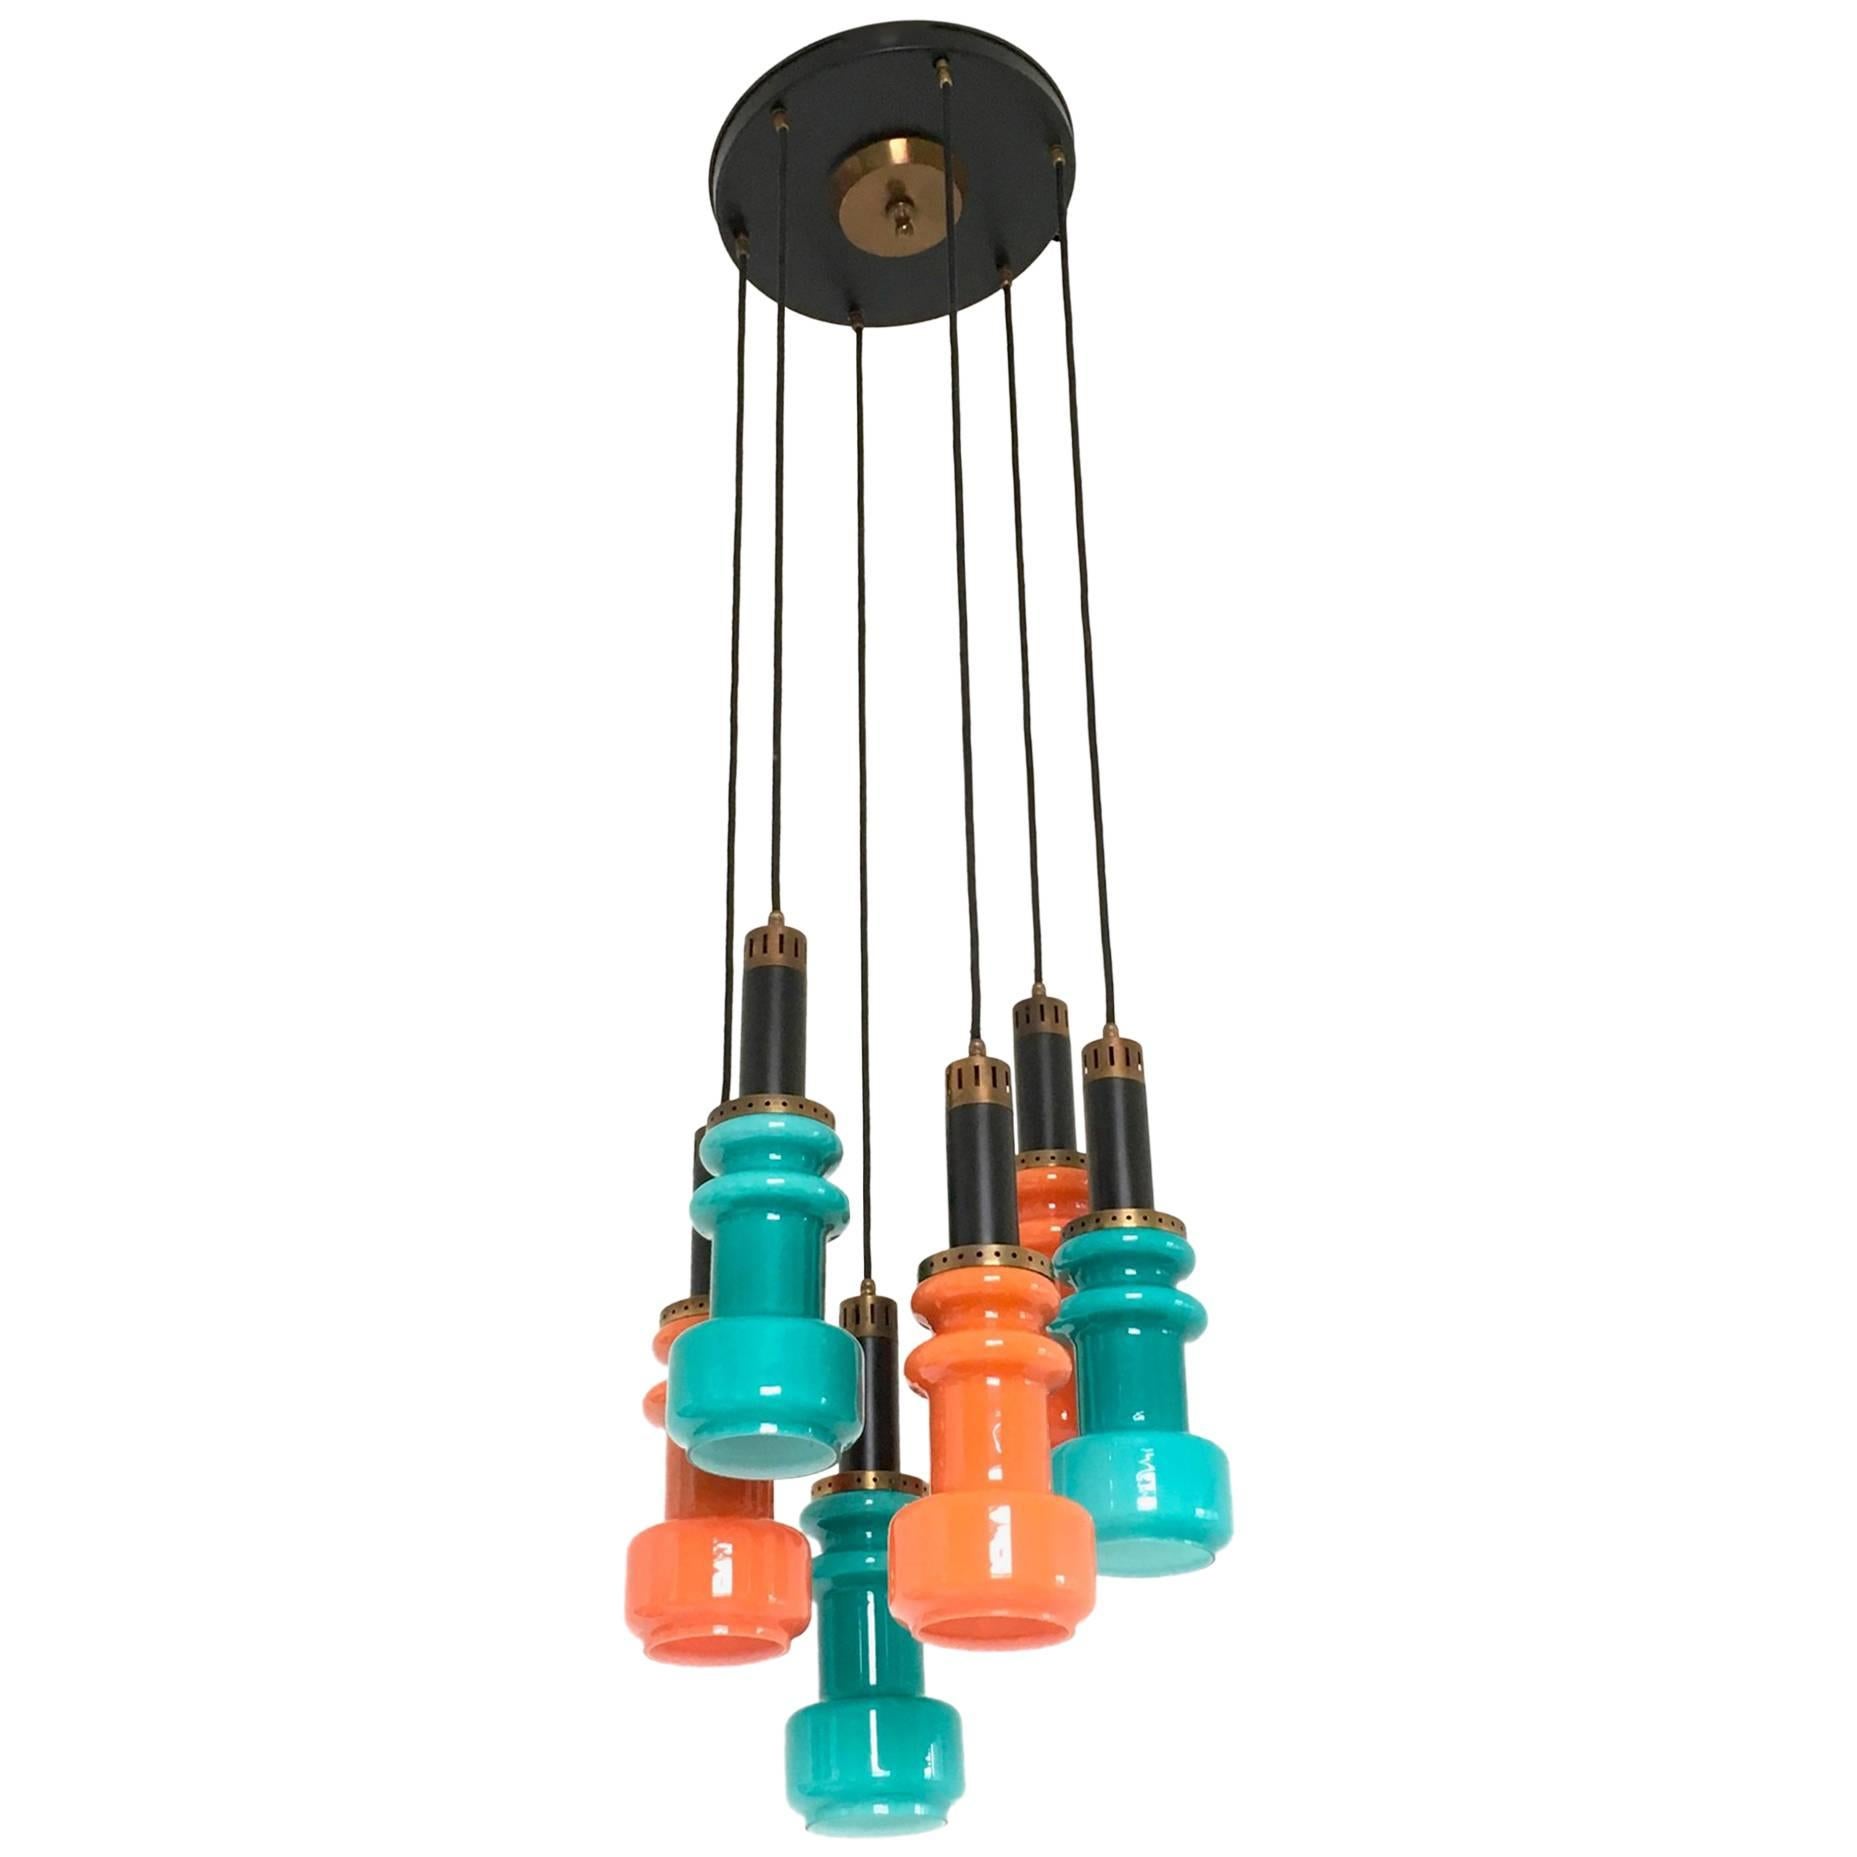 Six-Light Teal and Orange Chandelier by Stilnovo, Italy, 1960s